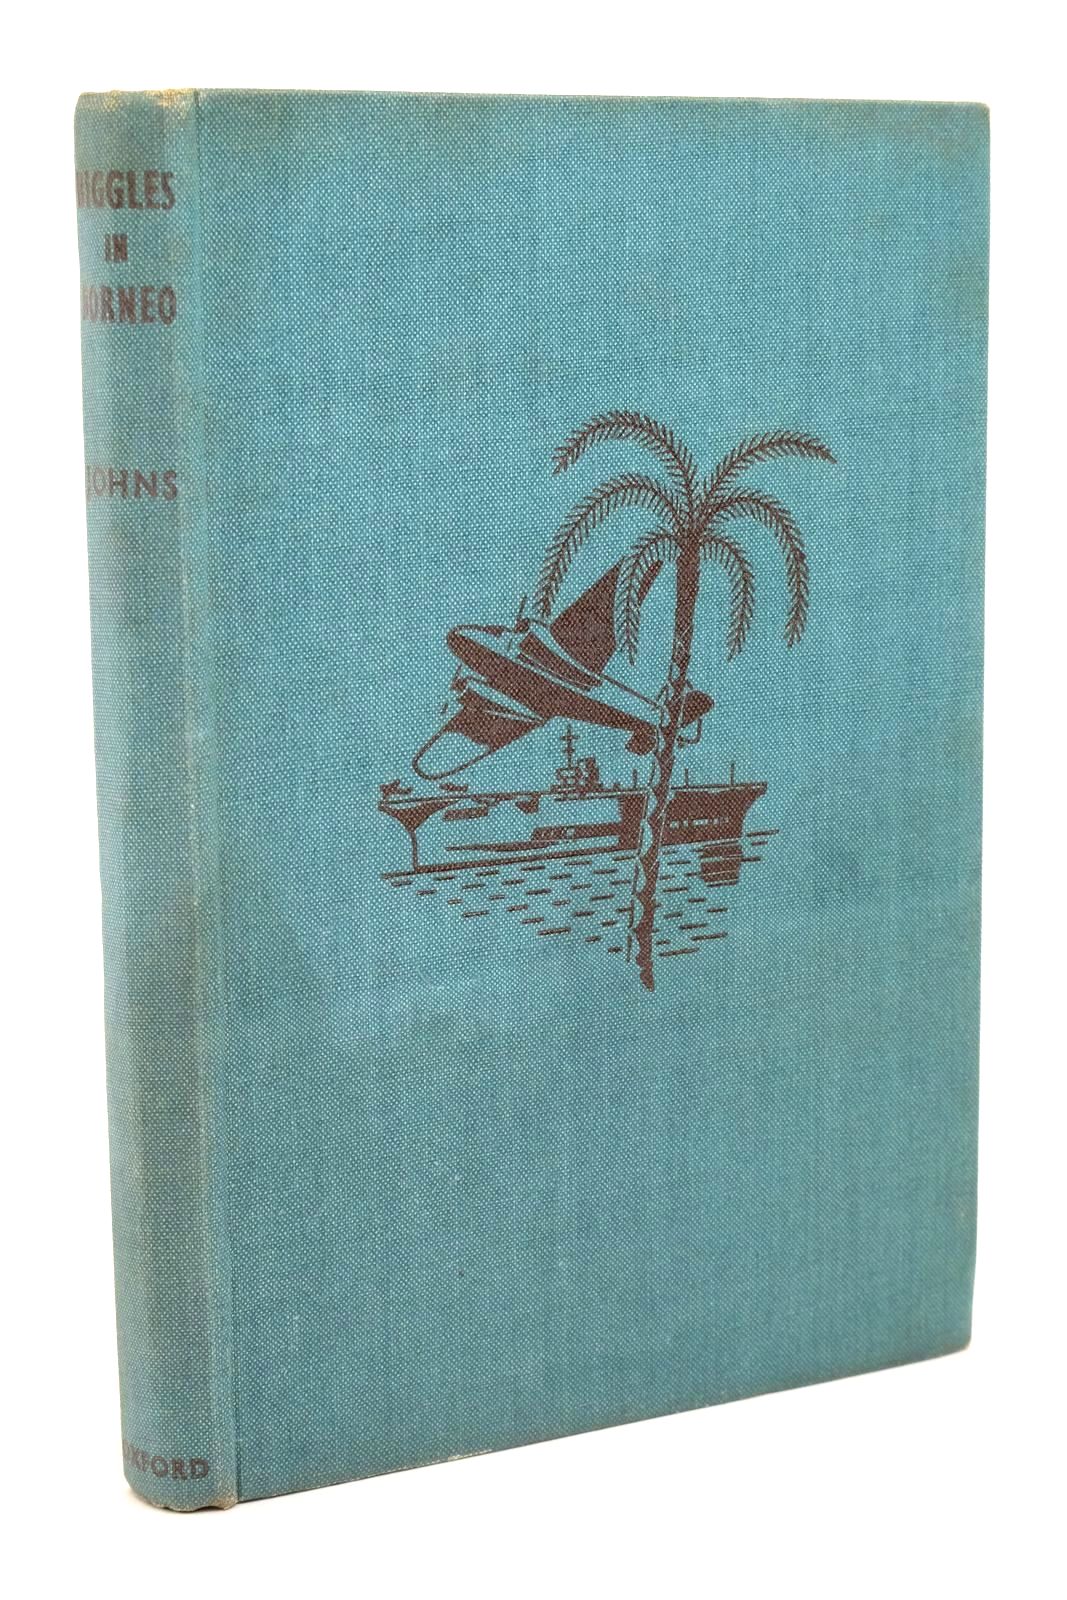 Photo of BIGGLES IN BORNEO written by Johns, W.E. illustrated by Tresilian, Stuart published by Oxford University Press (STOCK CODE: 1322744)  for sale by Stella & Rose's Books